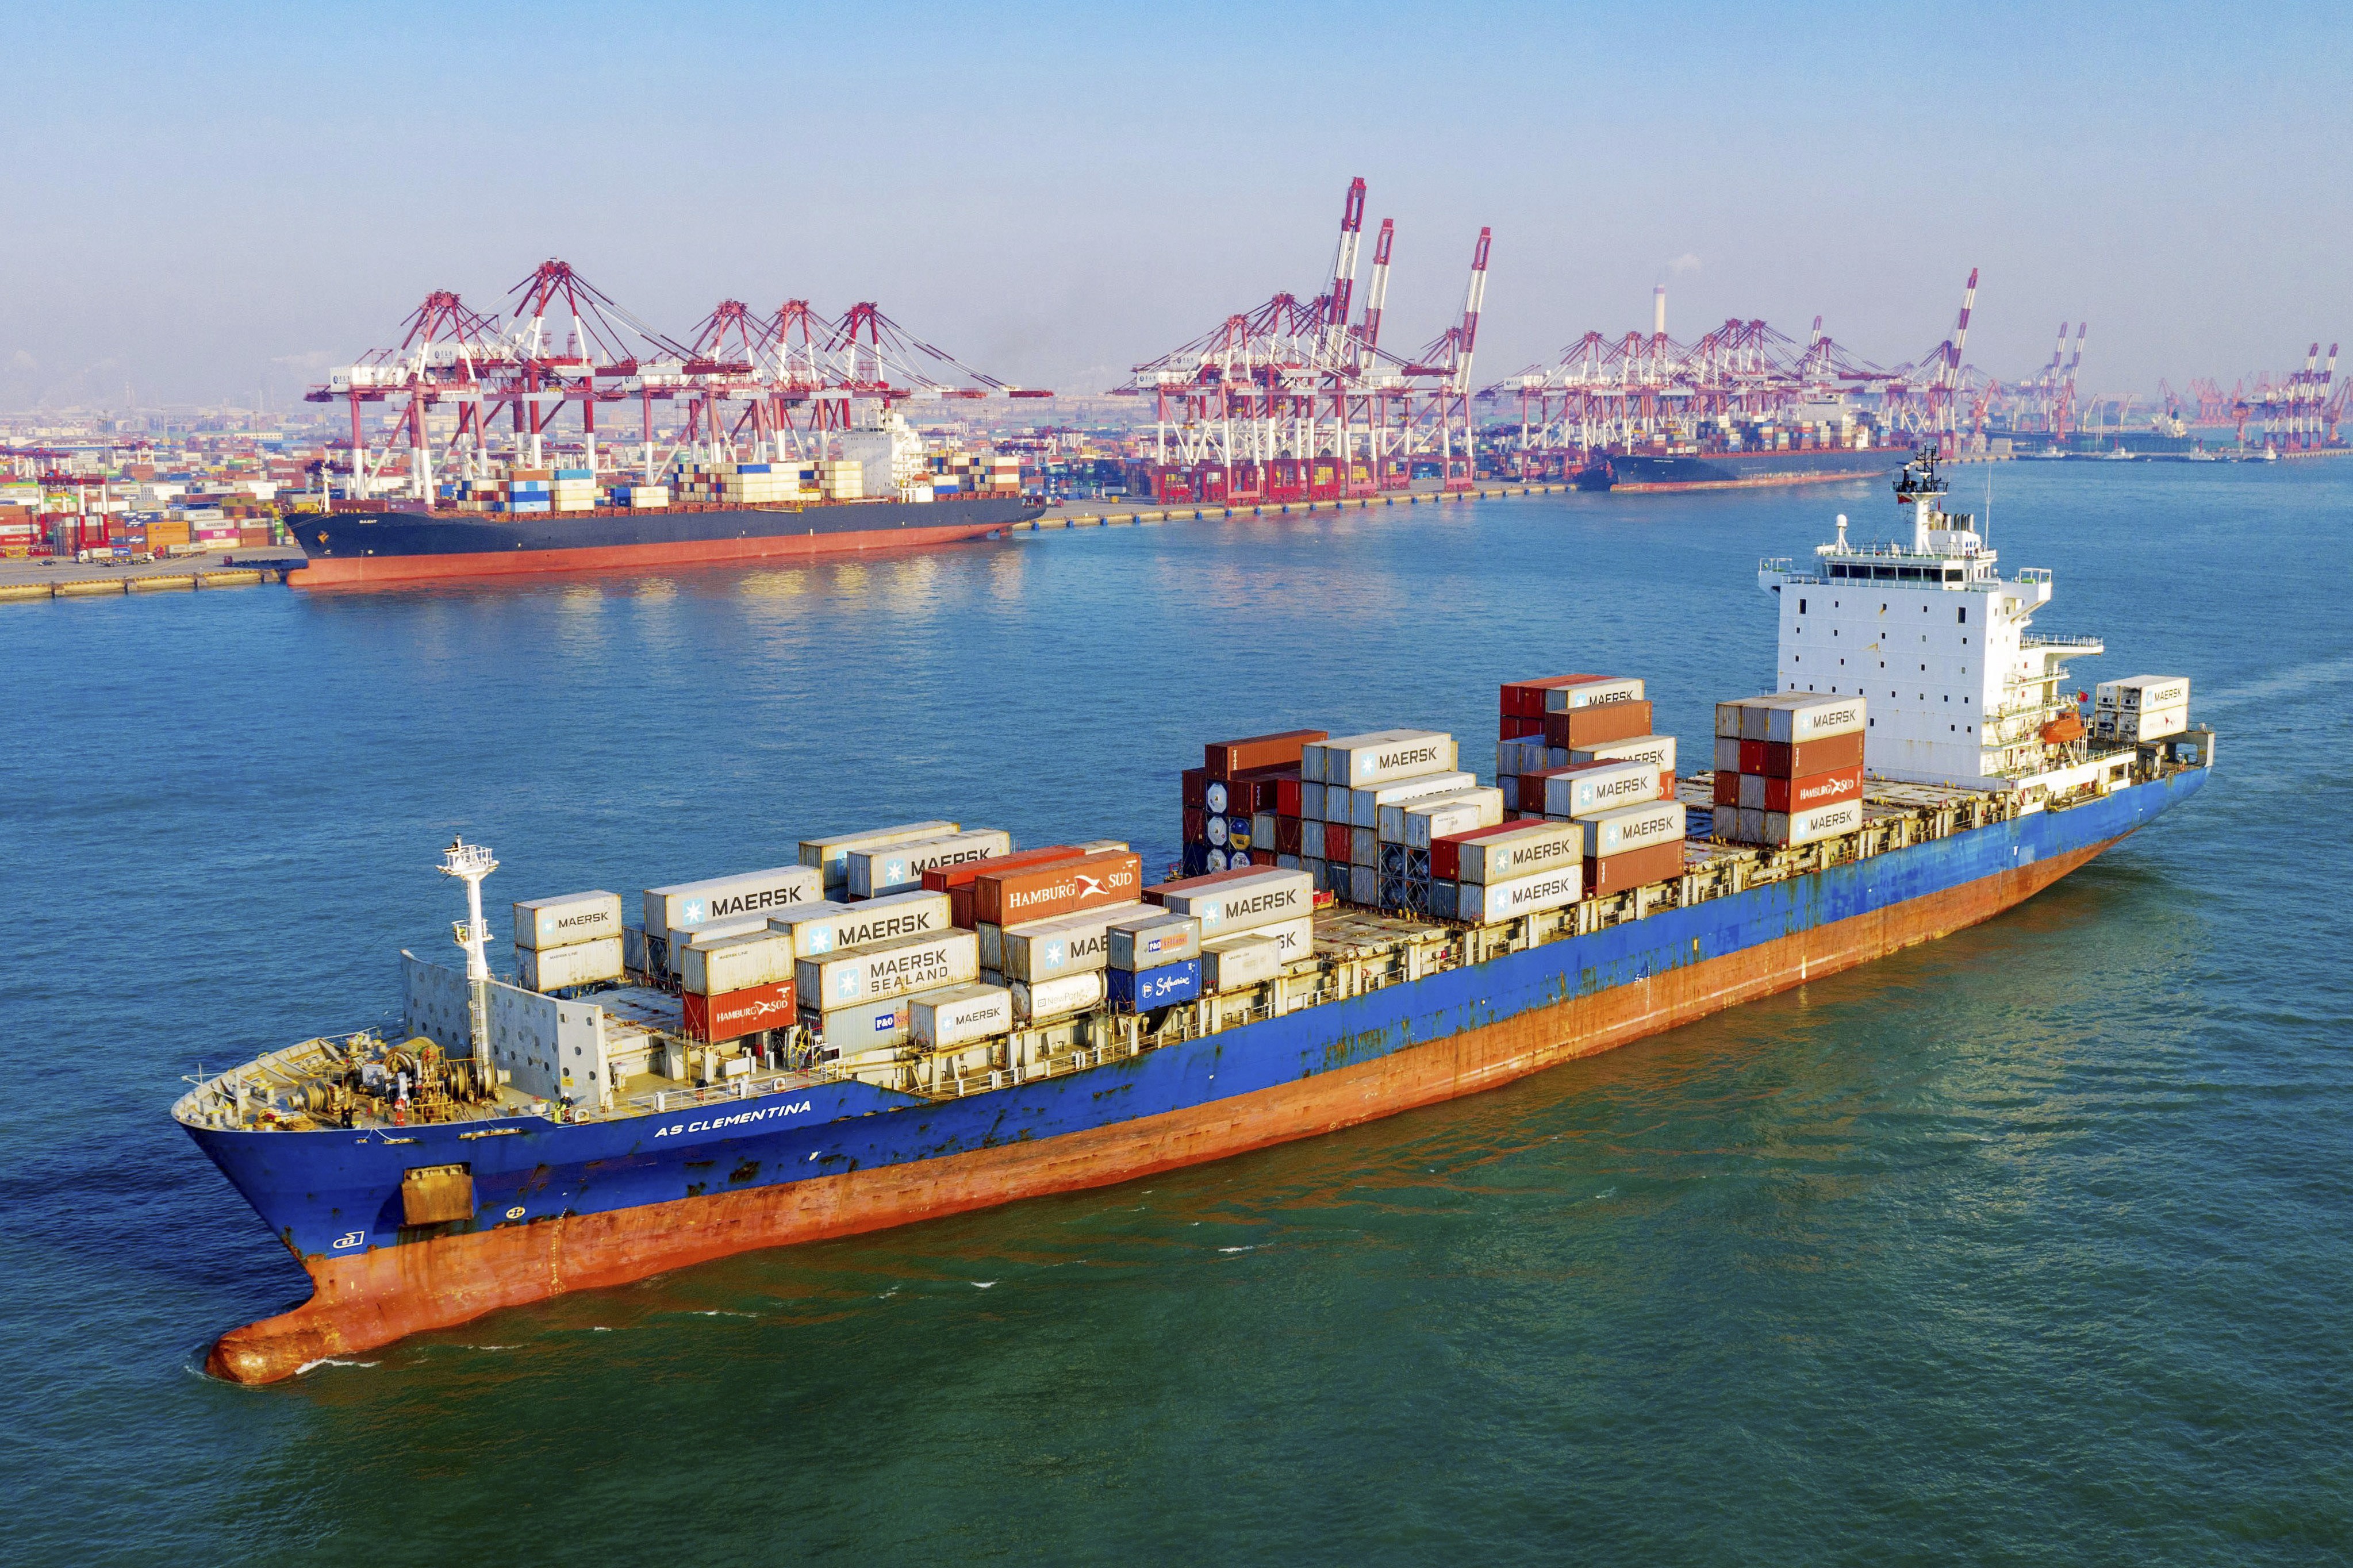 A container vessel moves past the port in Qingdao in eastern China's Shandong province. China's exports rose 0.5% in 2019 despite a tariff war with Washington after growth rebounded in December on stronger demand from other markets. Photo: AP